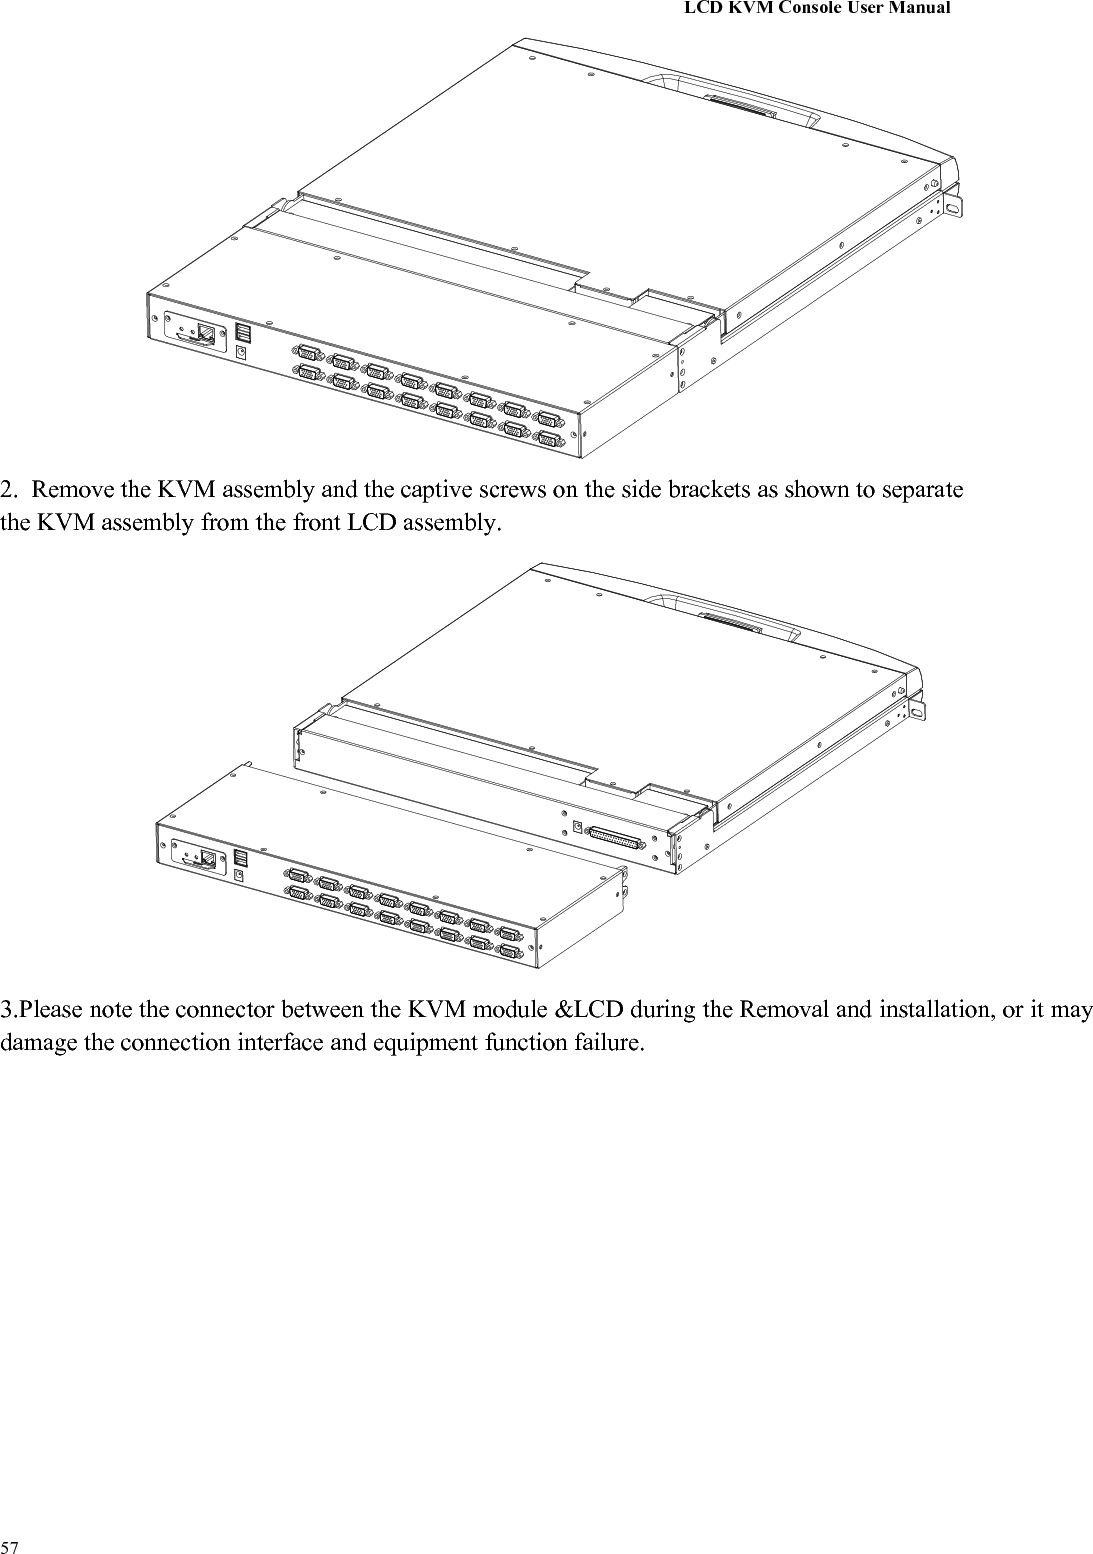 LCD KVM Console User Manual572. Remove the KVM assembly and the captive screws on the side brackets as shown to separatethe KVM assembly from the front LCD assembly.3.Please note the connector between the KVM module &amp;LCD during the Removal and installation, or it maydamage the connection interface and equipment function failure.